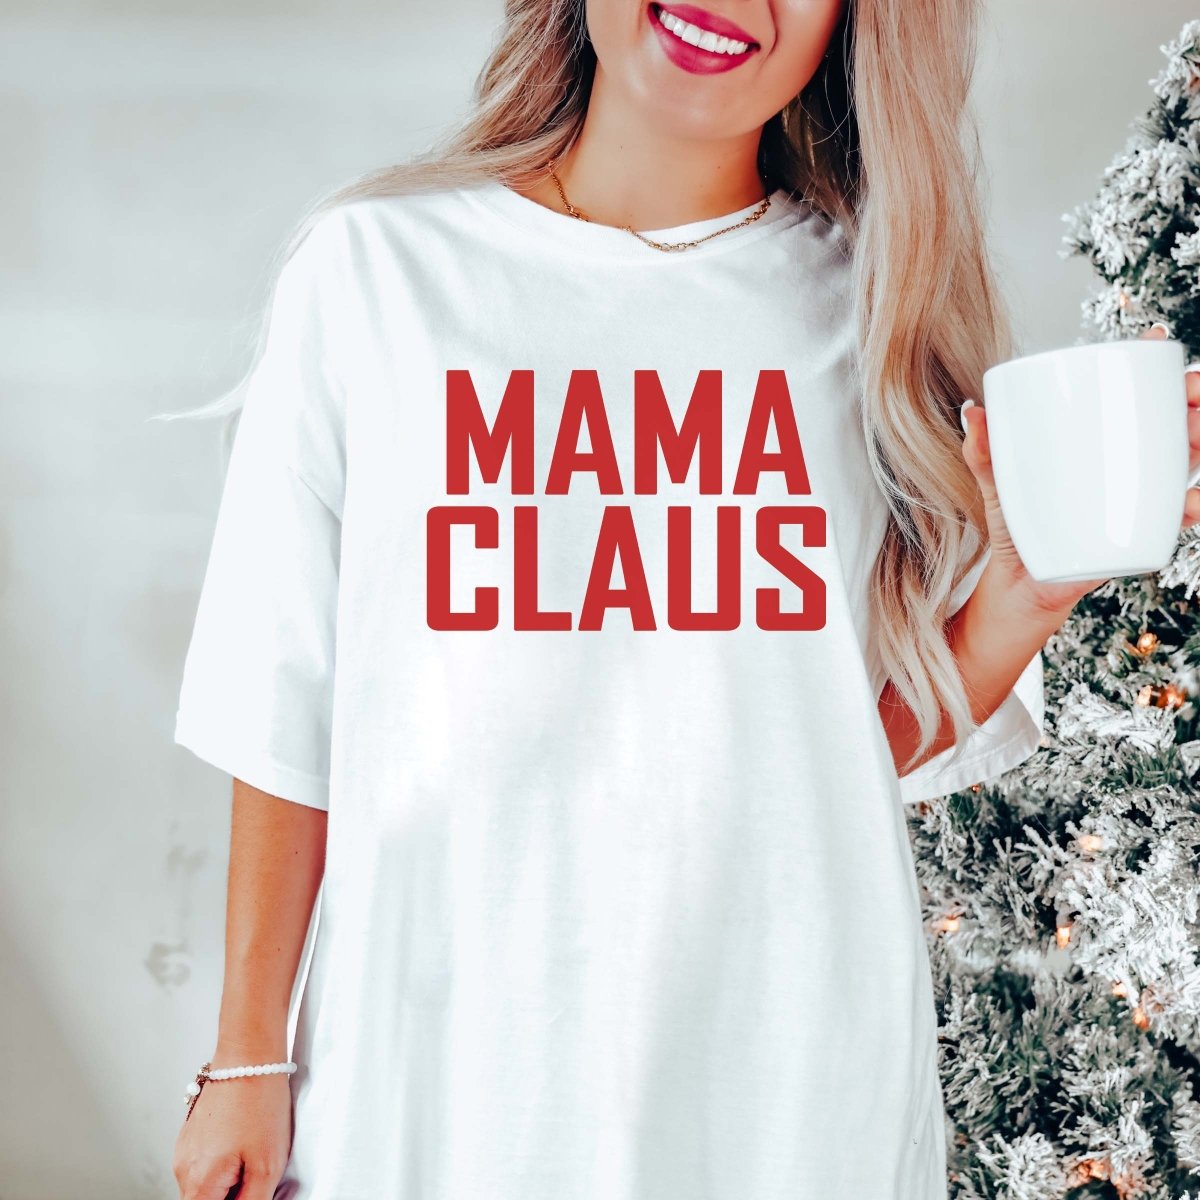 Mama claus Comfort Color Wholesale Tee - Limeberry Designs